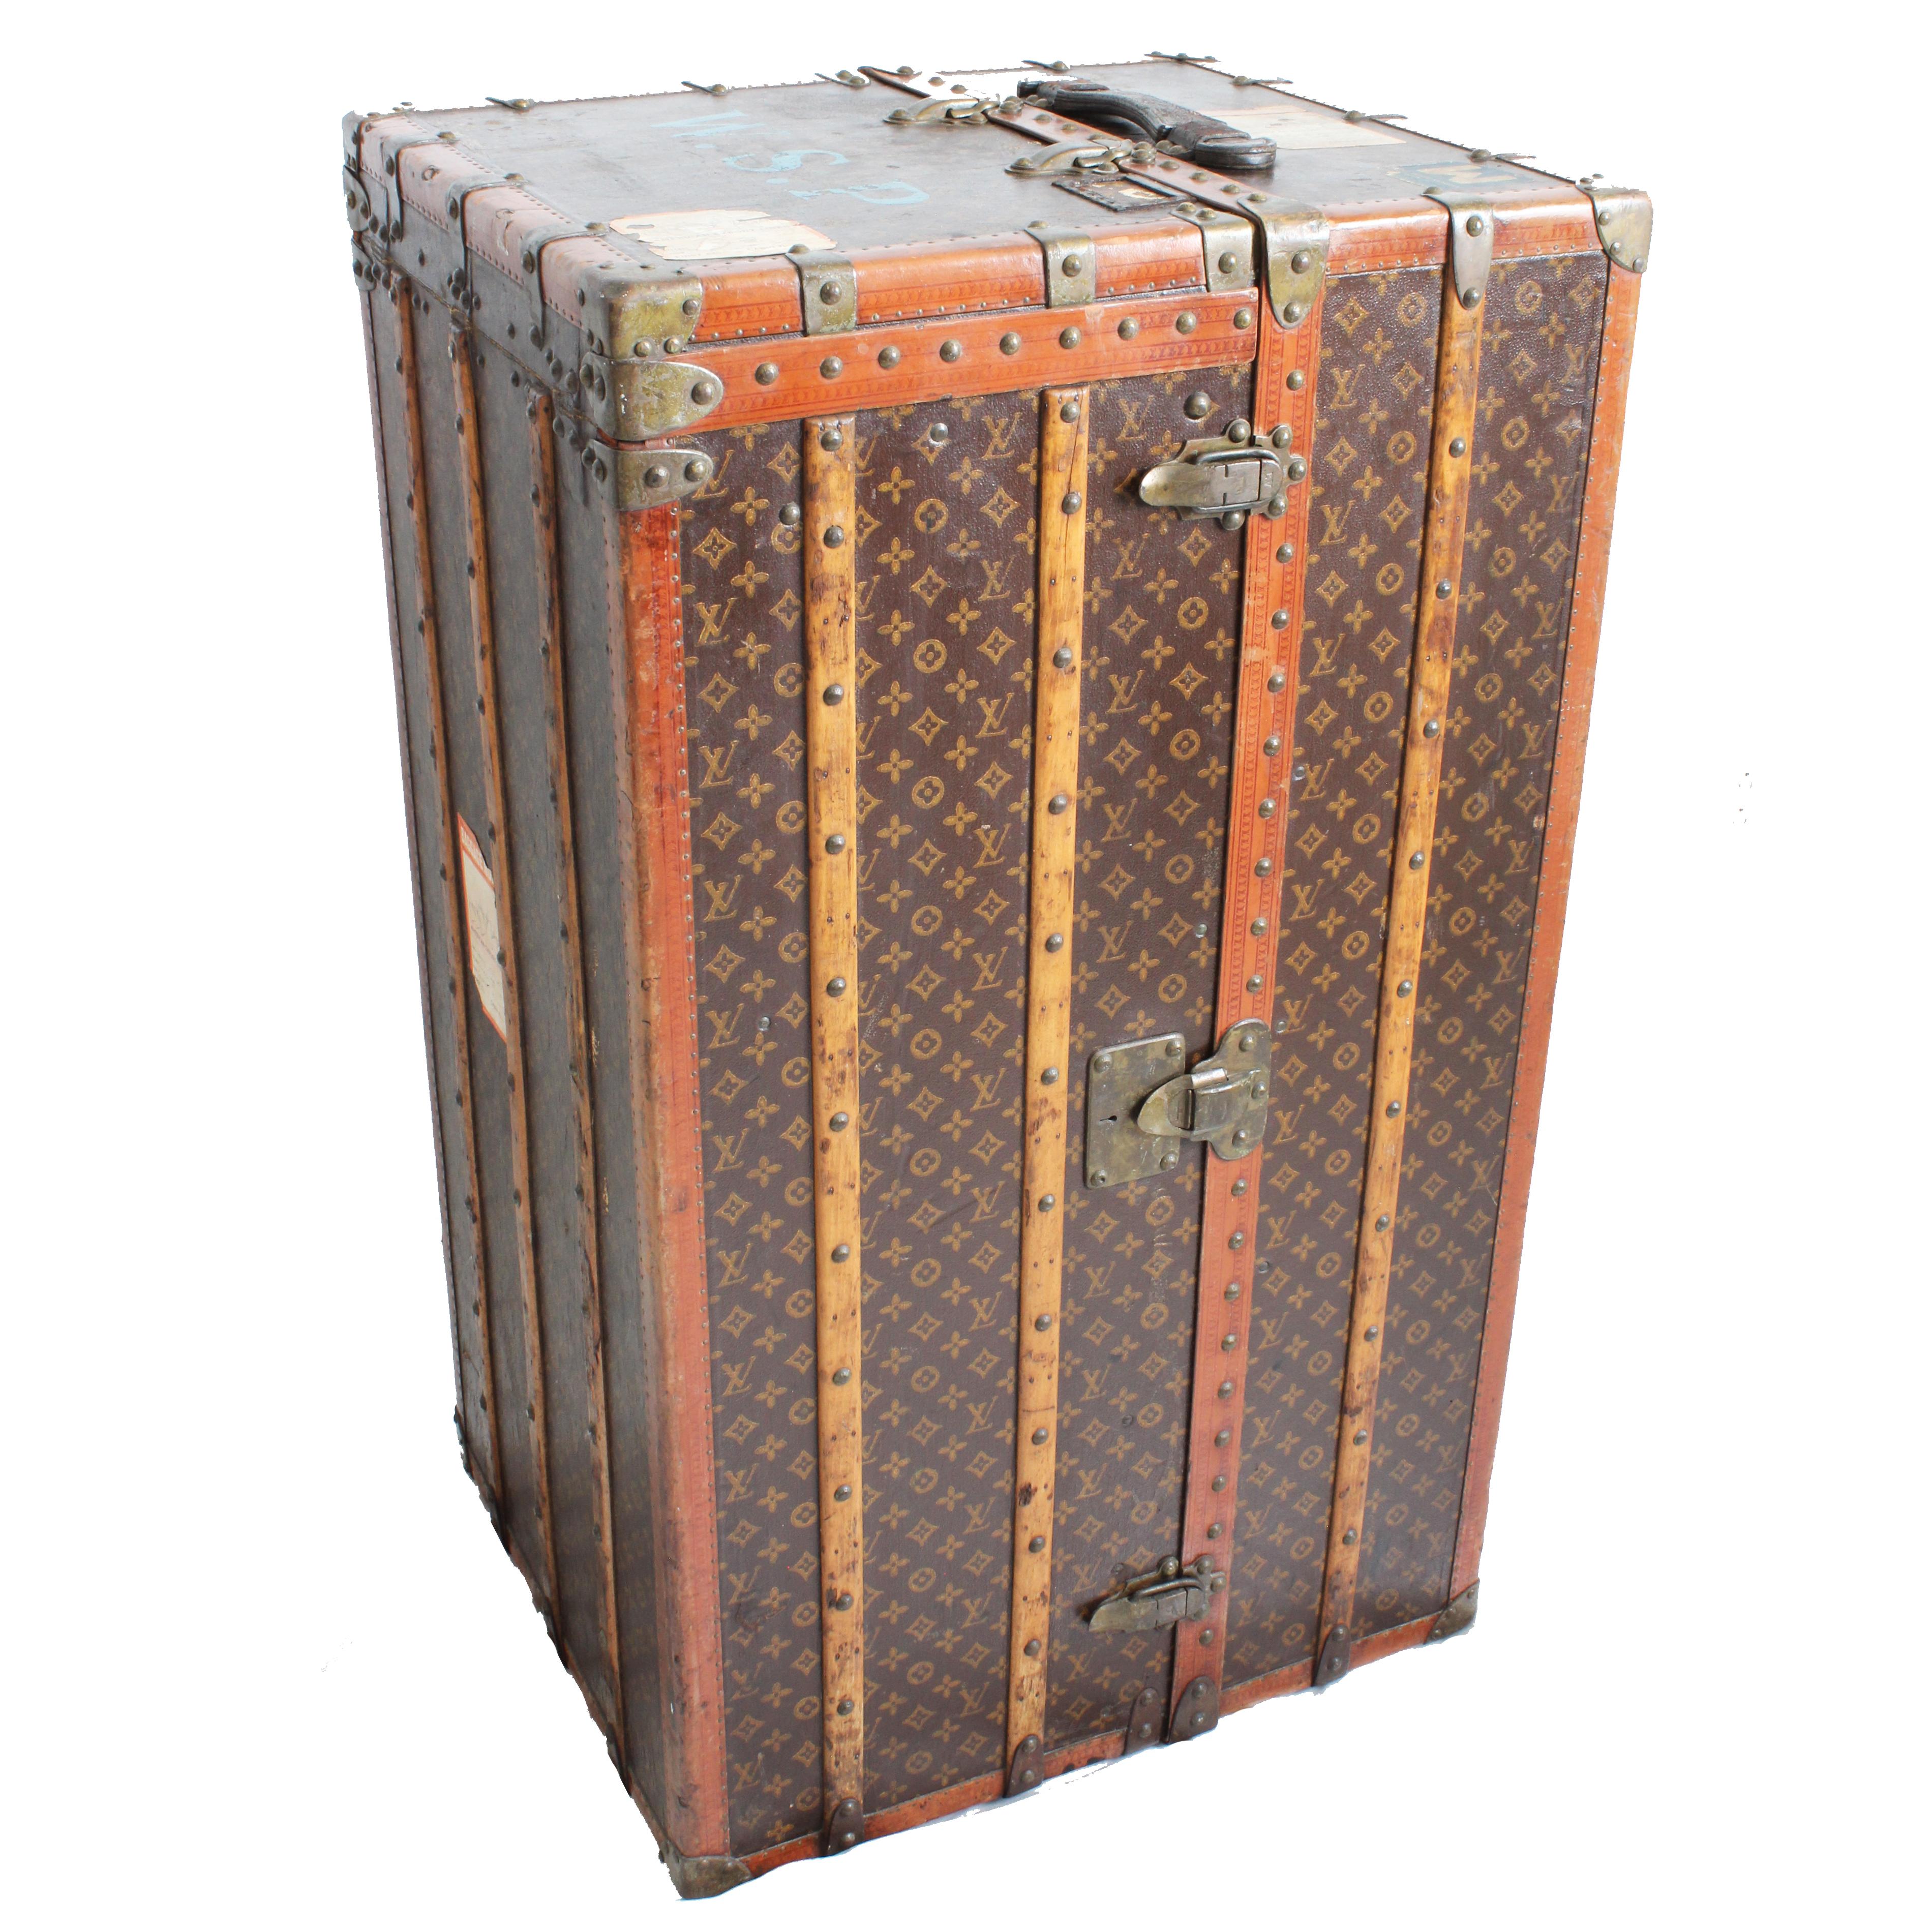 Louis Vuitton Large Wardrobe Steamer Trunk Monogram Travel Case Early 20th C  In Good Condition For Sale In Port Saint Lucie, FL